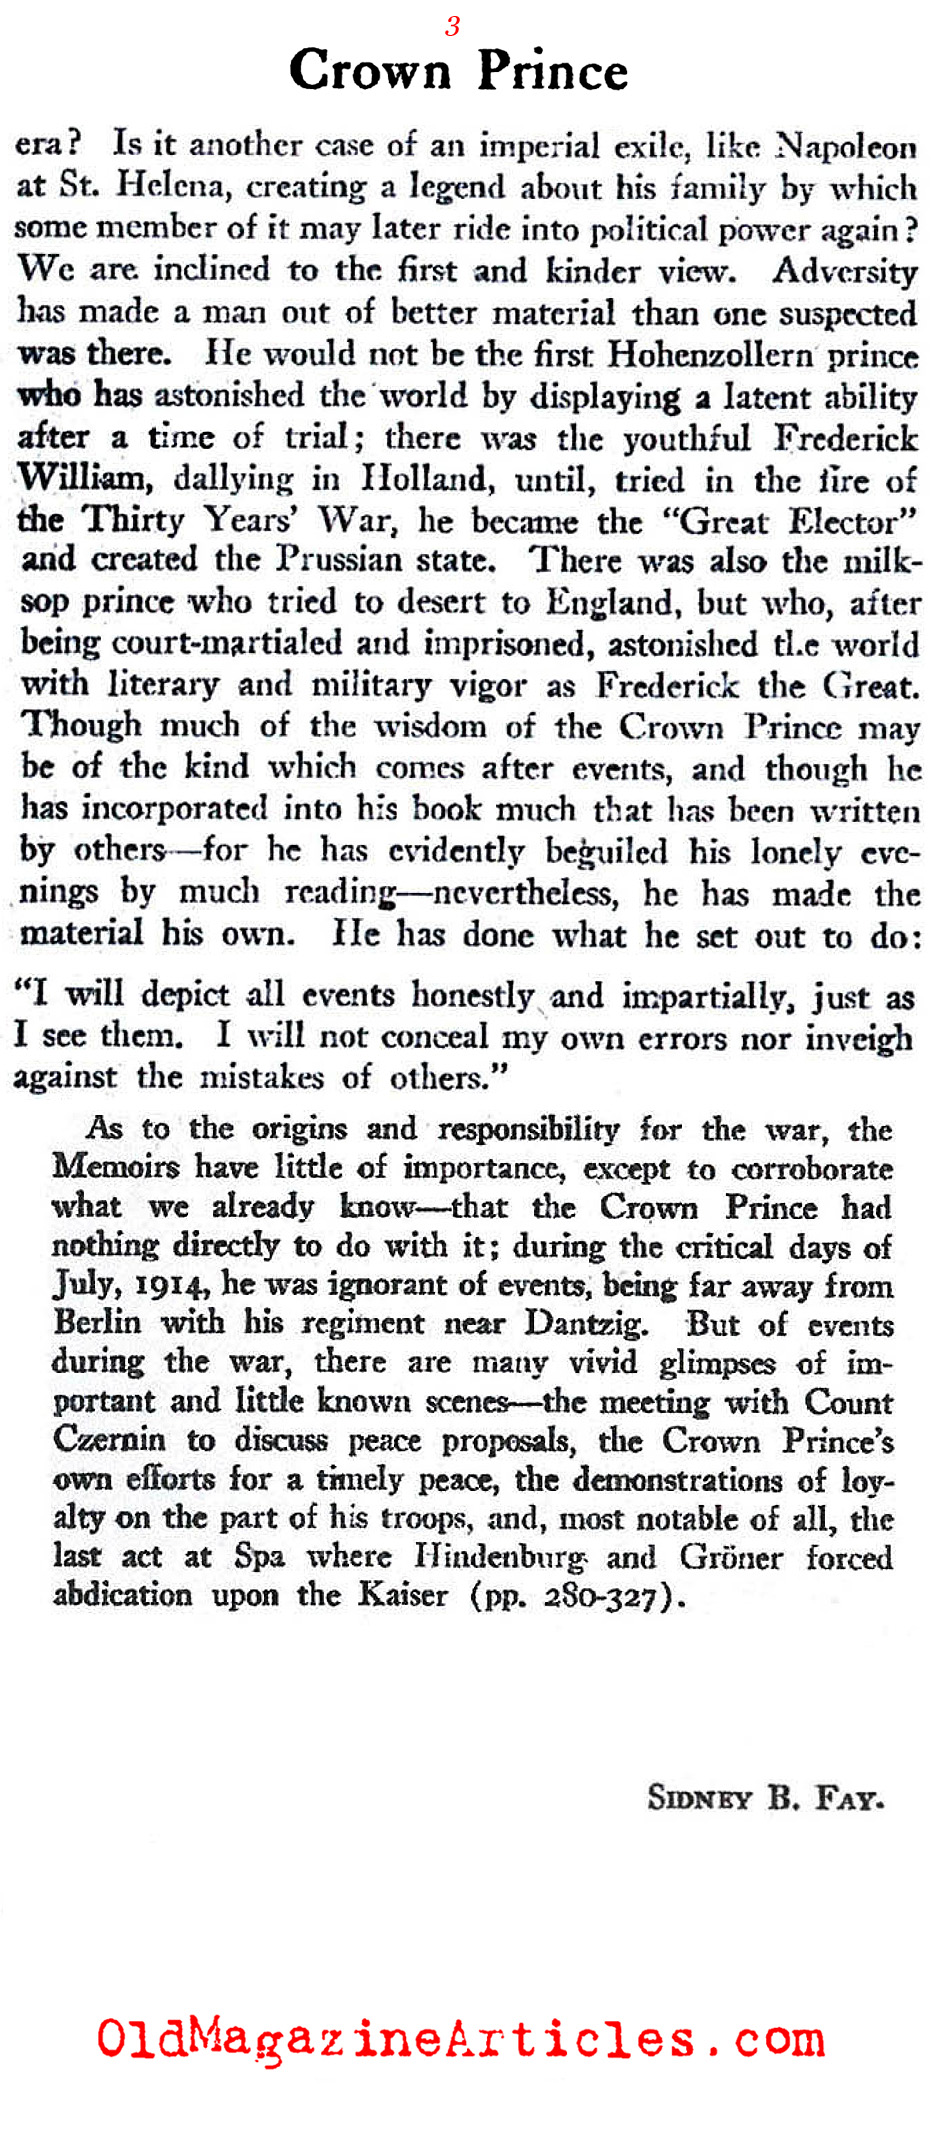 A Review of the Memoir by the Crown Prince (The New Republic, 1922)